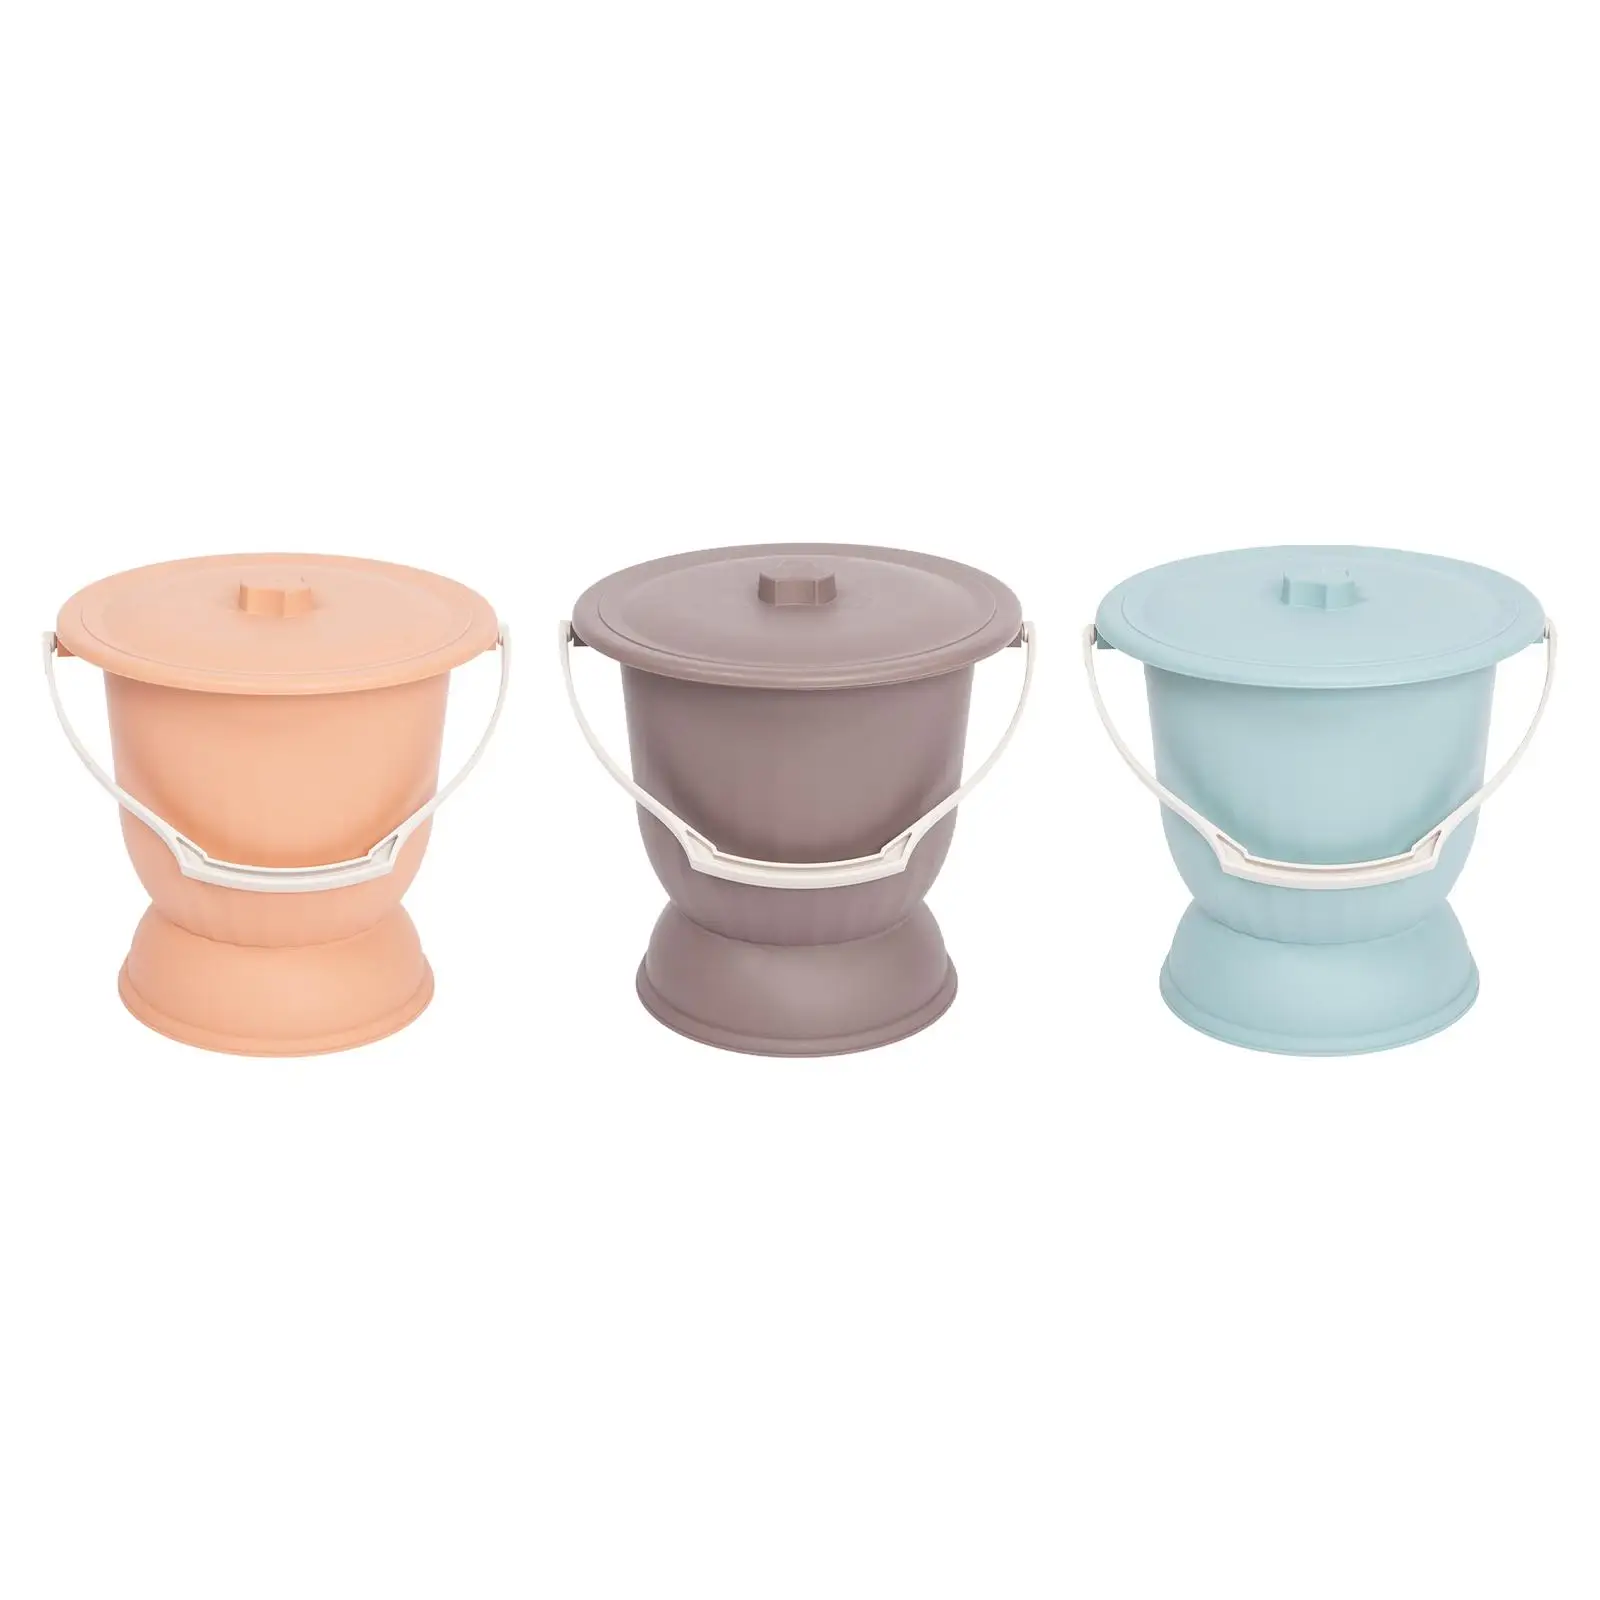 Household Spittoon with Lid Thickened Pot Night Pot Bedside Commode Bucket for Woman Kids Adults Elder Children